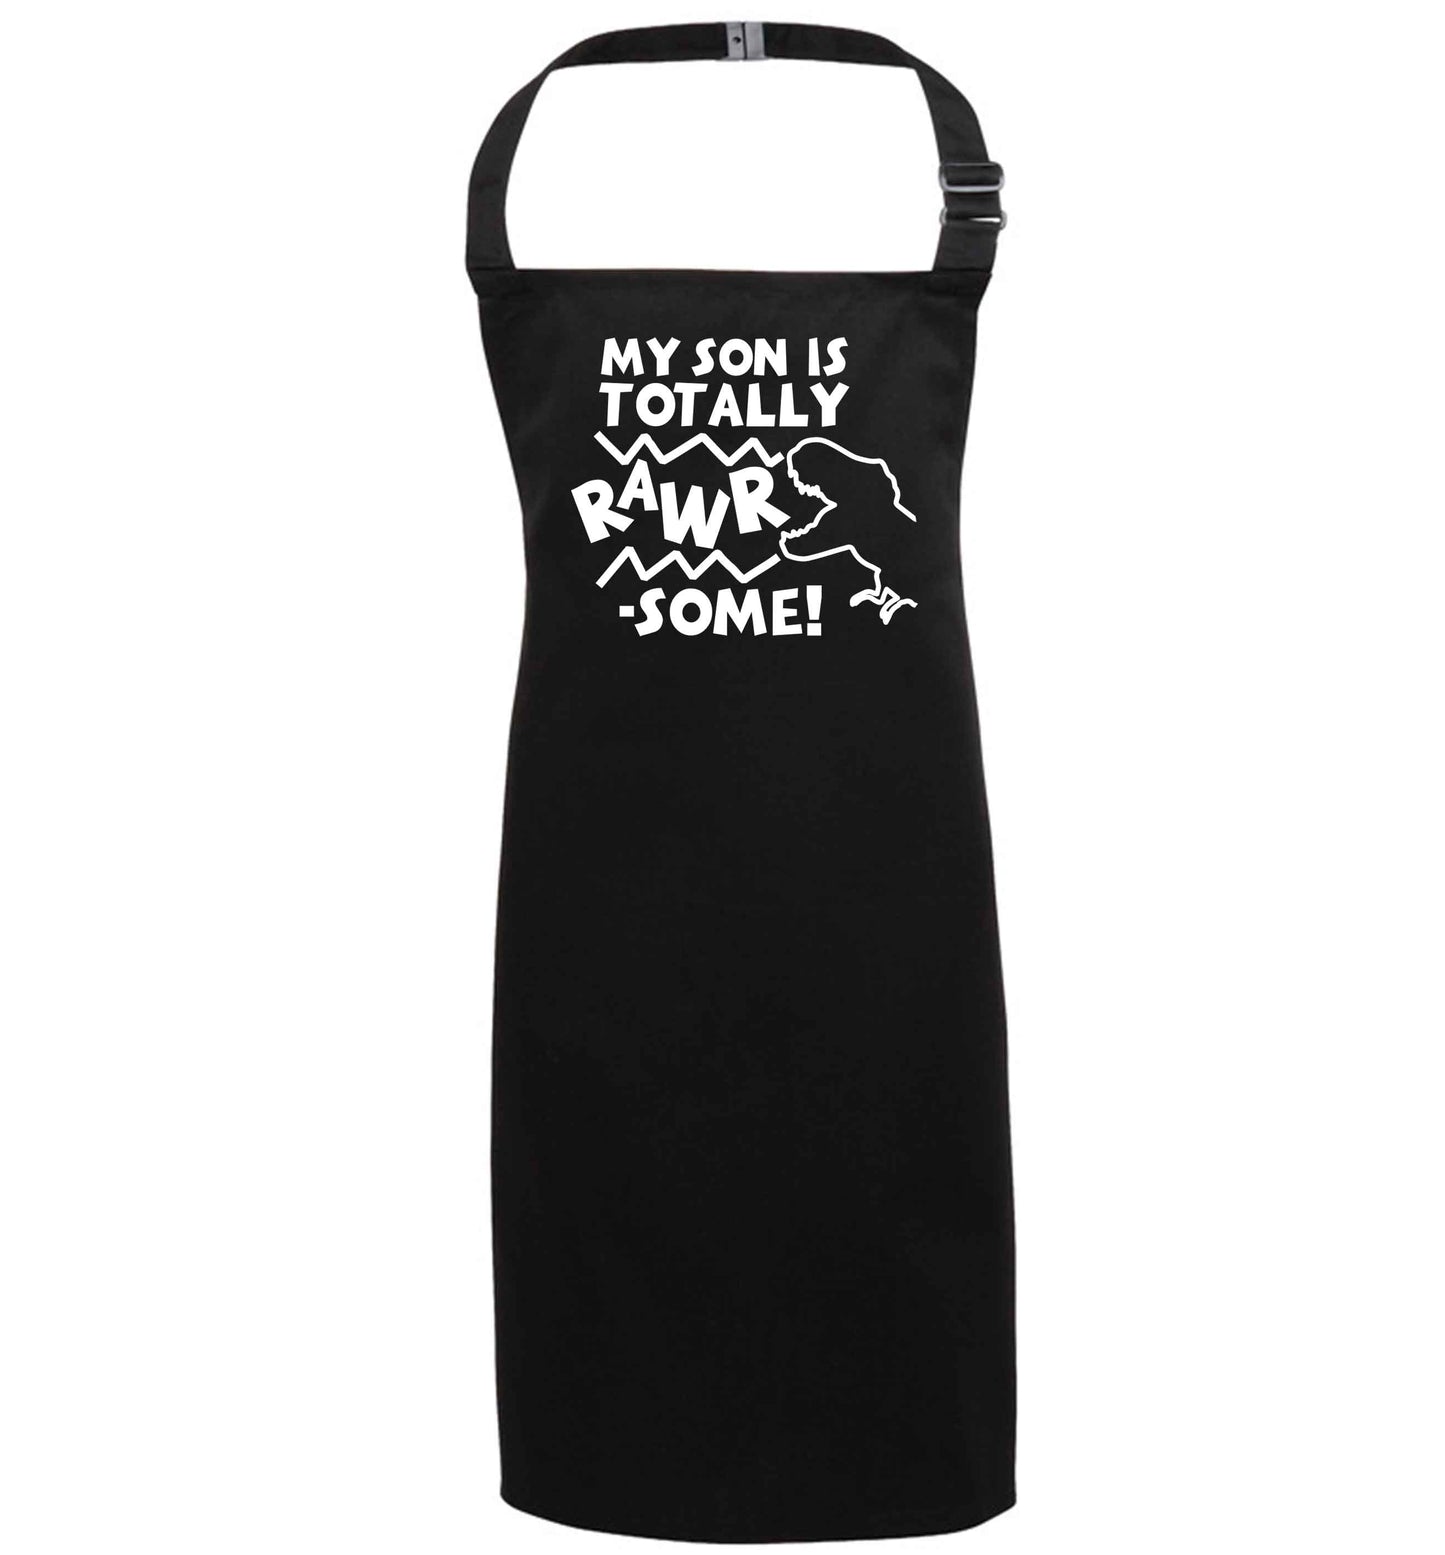 My son is totally rawrsome black apron 7-10 years